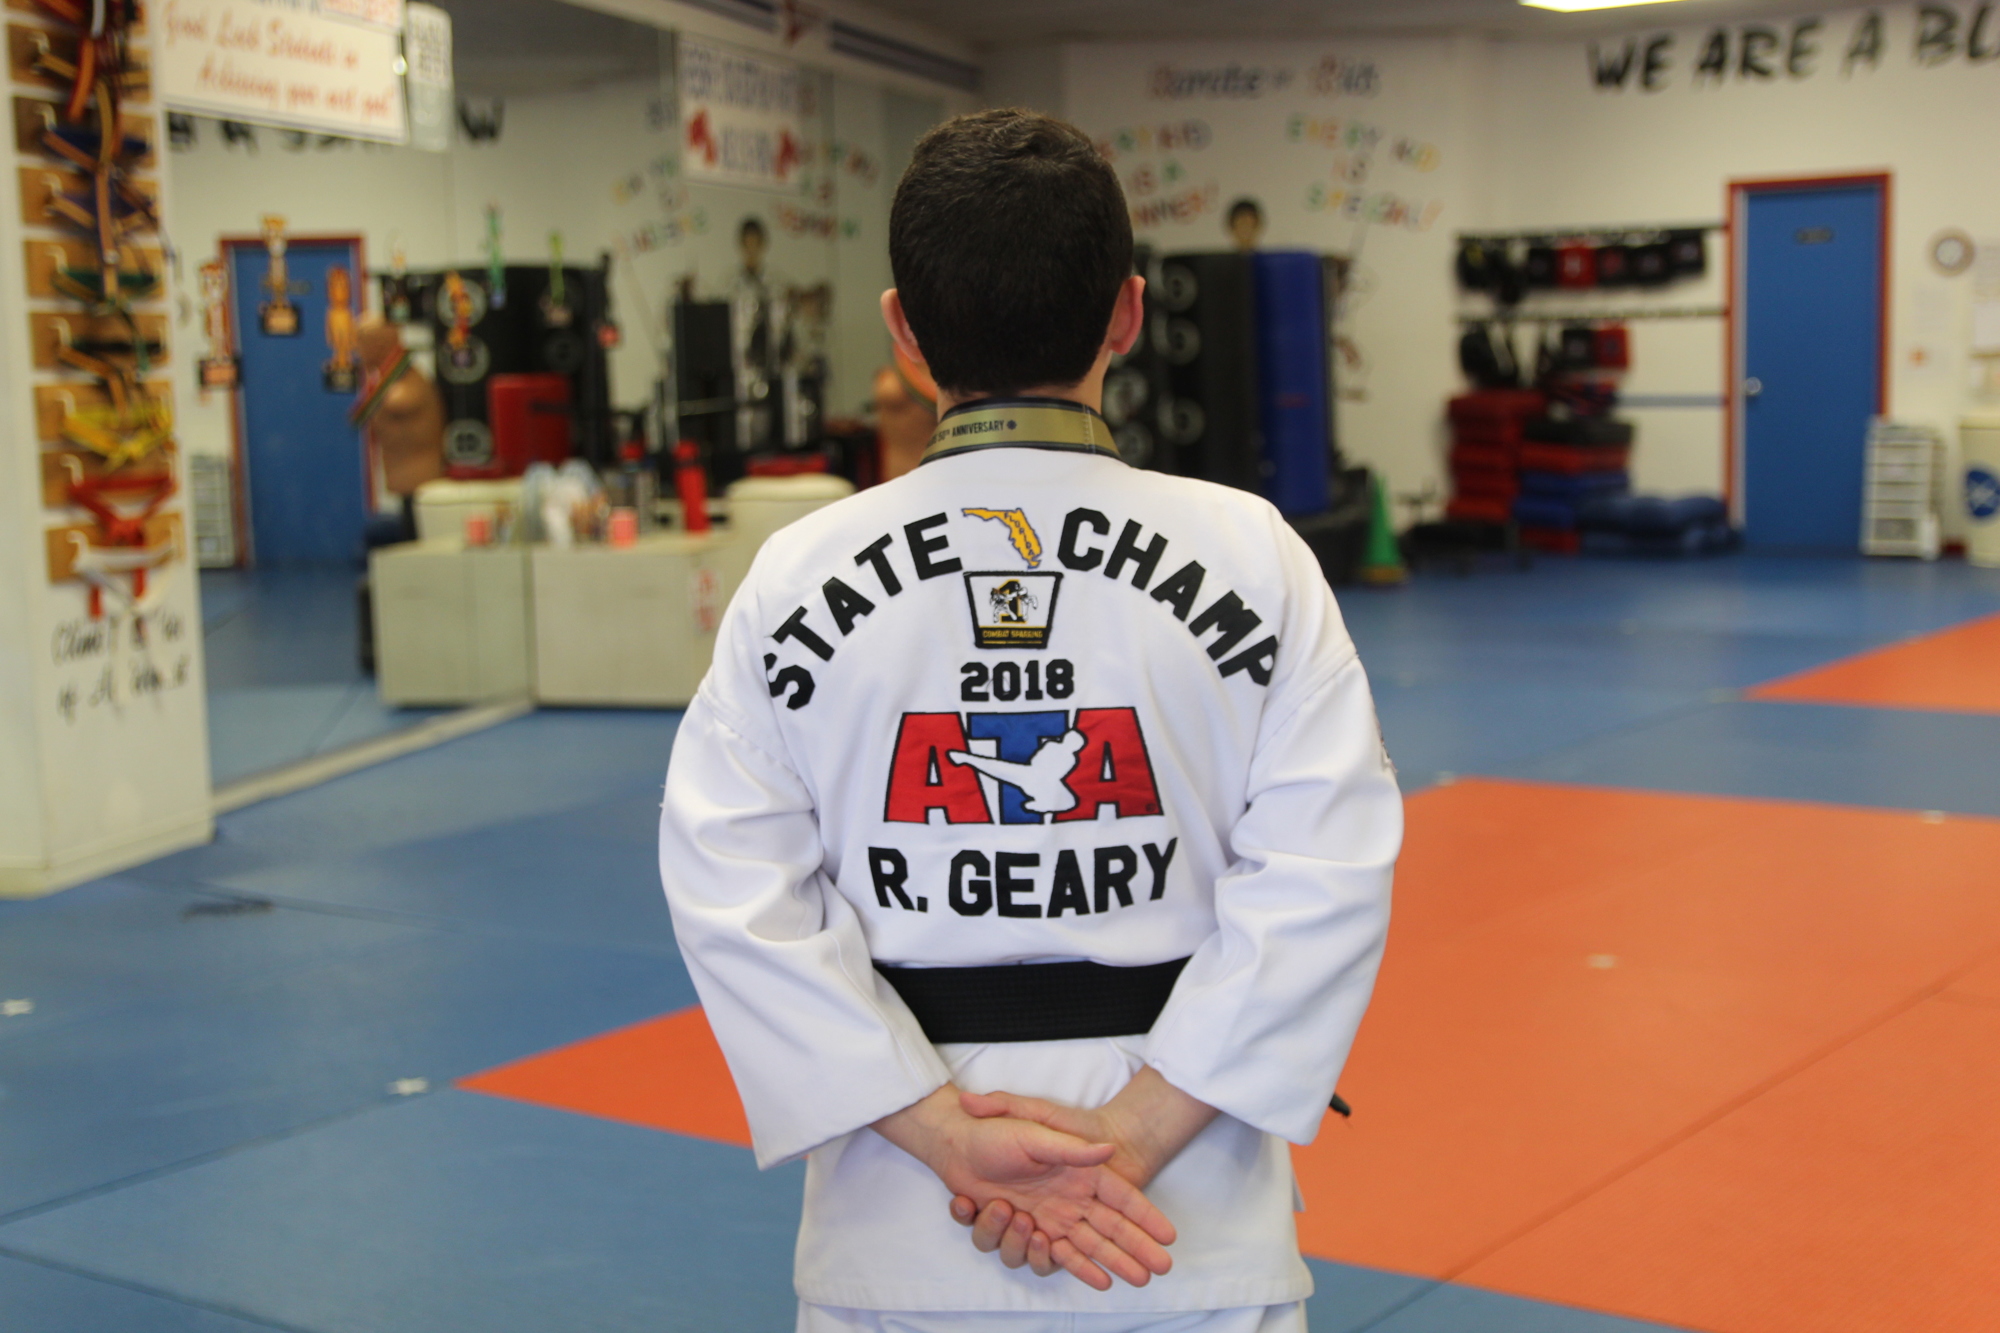 Ryan Geary shows his special uniform that reflects his 2018 state championship title in A Songahm Taekwondo. Photo by Tanya Russo 